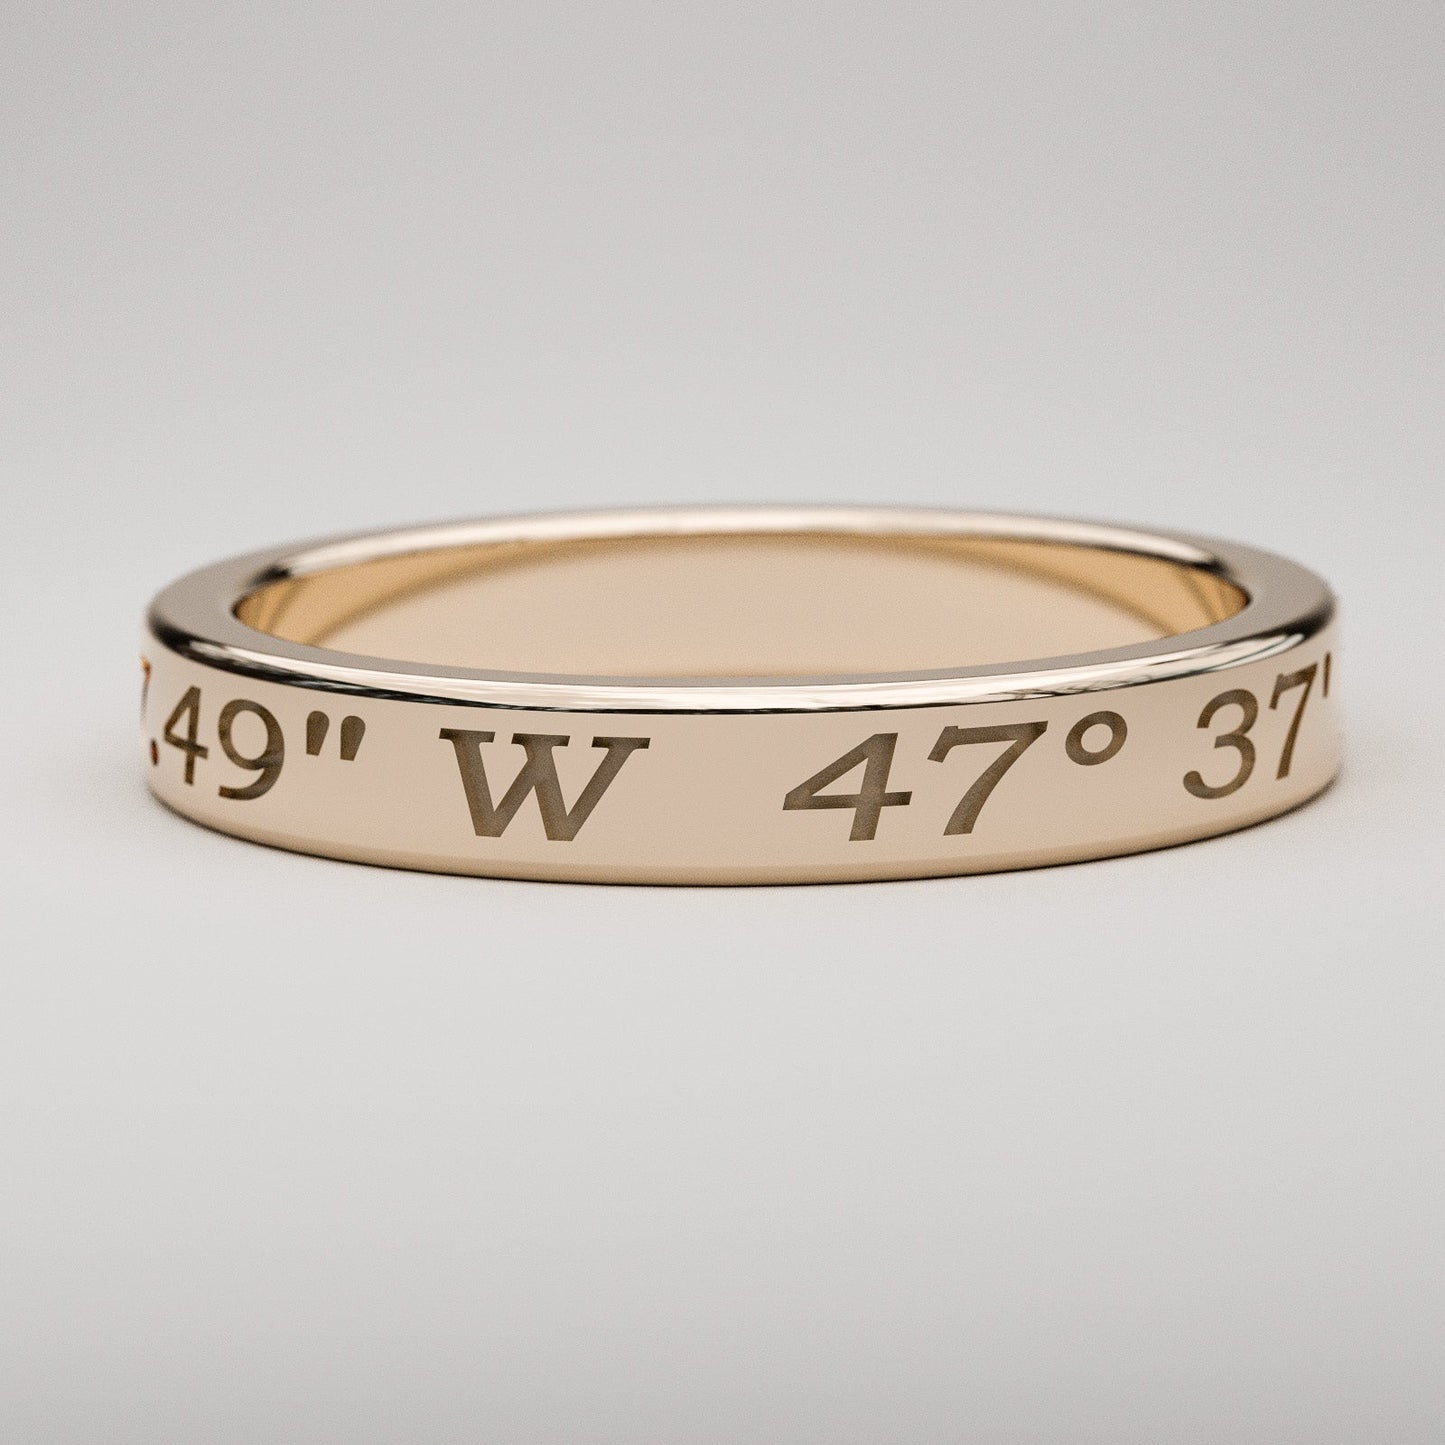 Engraved style custom coordinates ring in rose gold